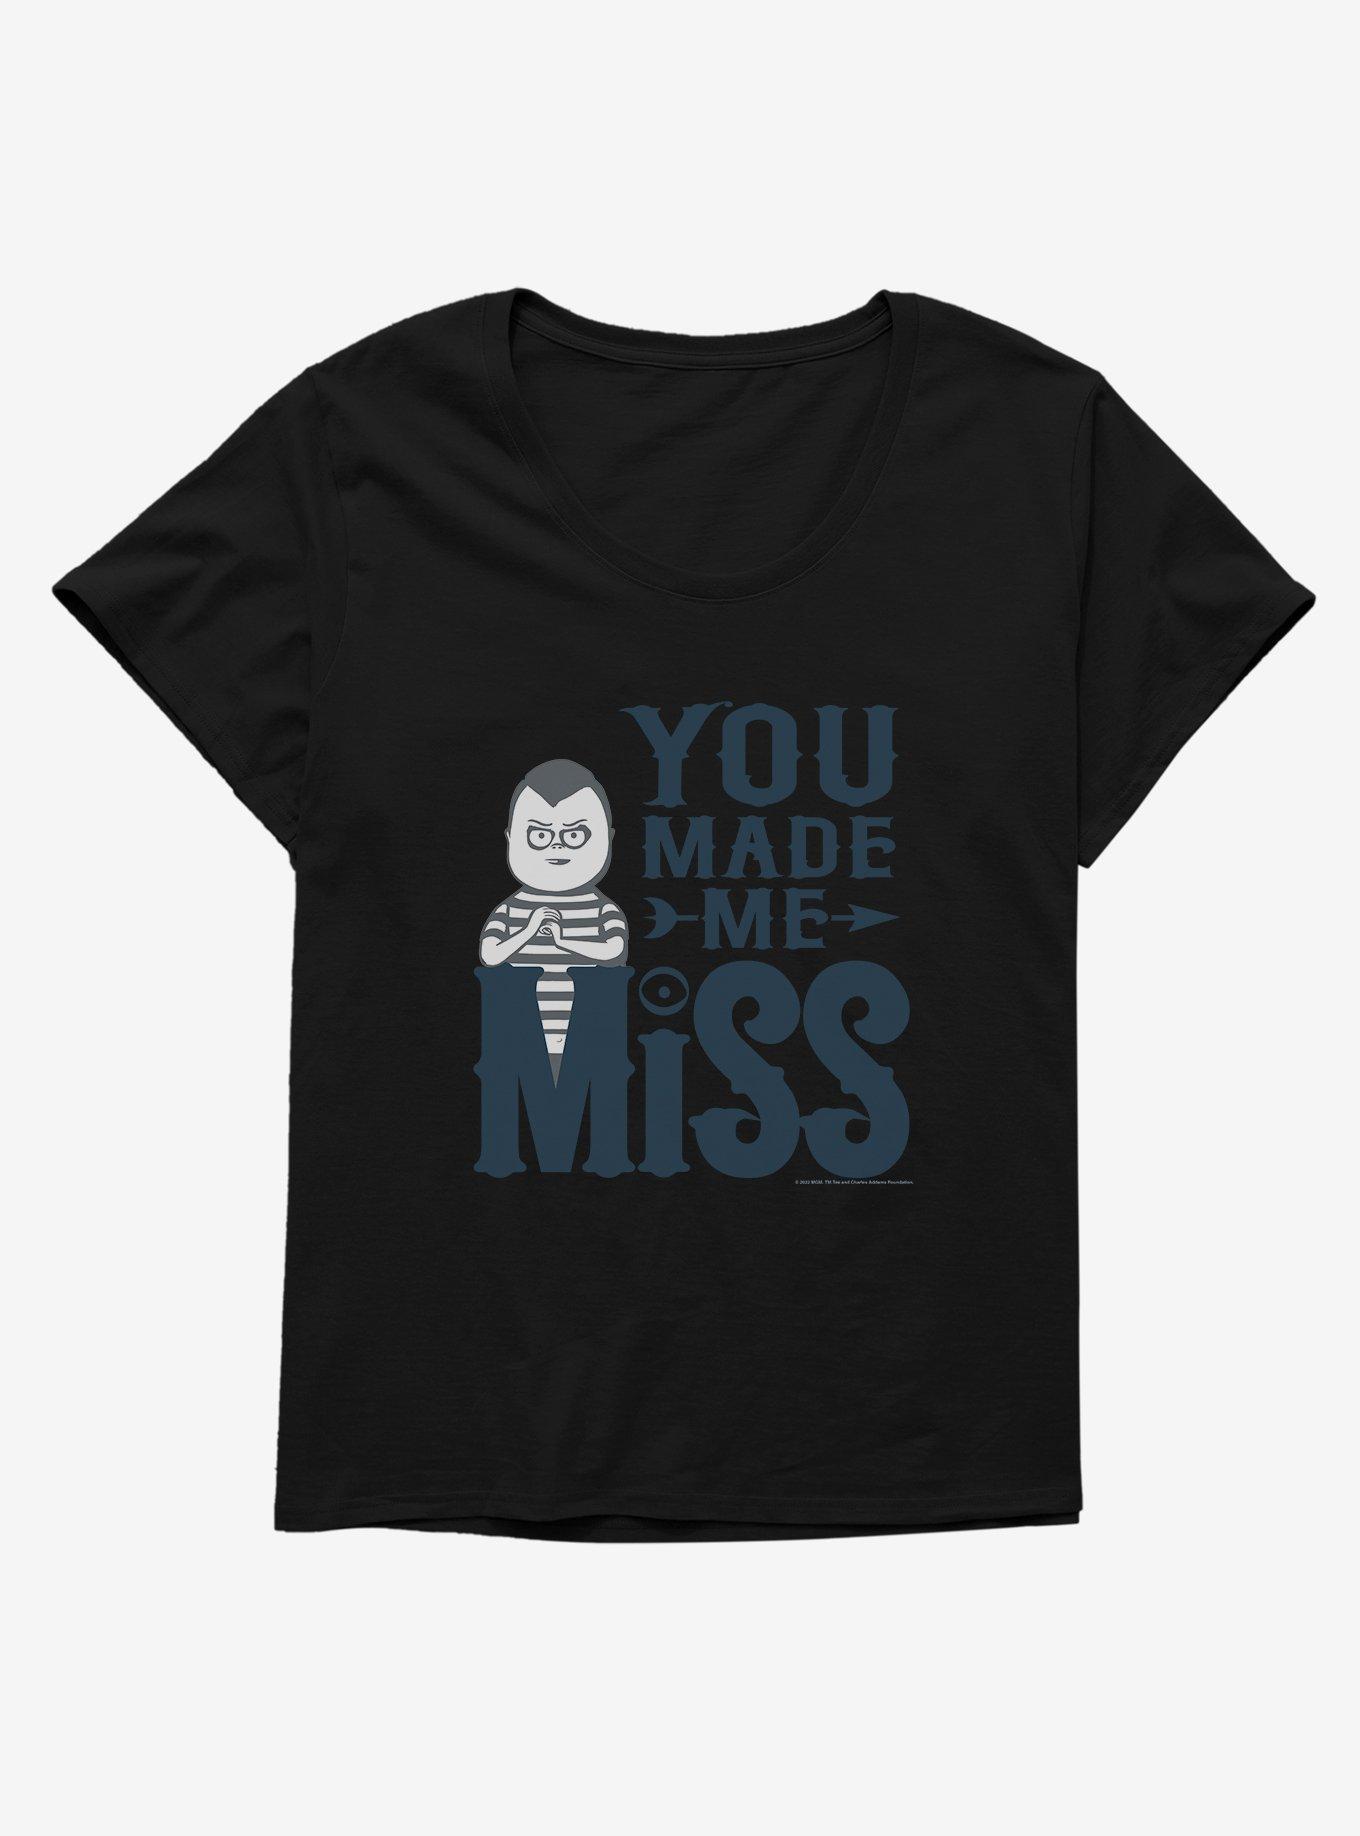 Addams Family You Made Me Miss Girls T-Shirt Plus Size, BLACK, hi-res